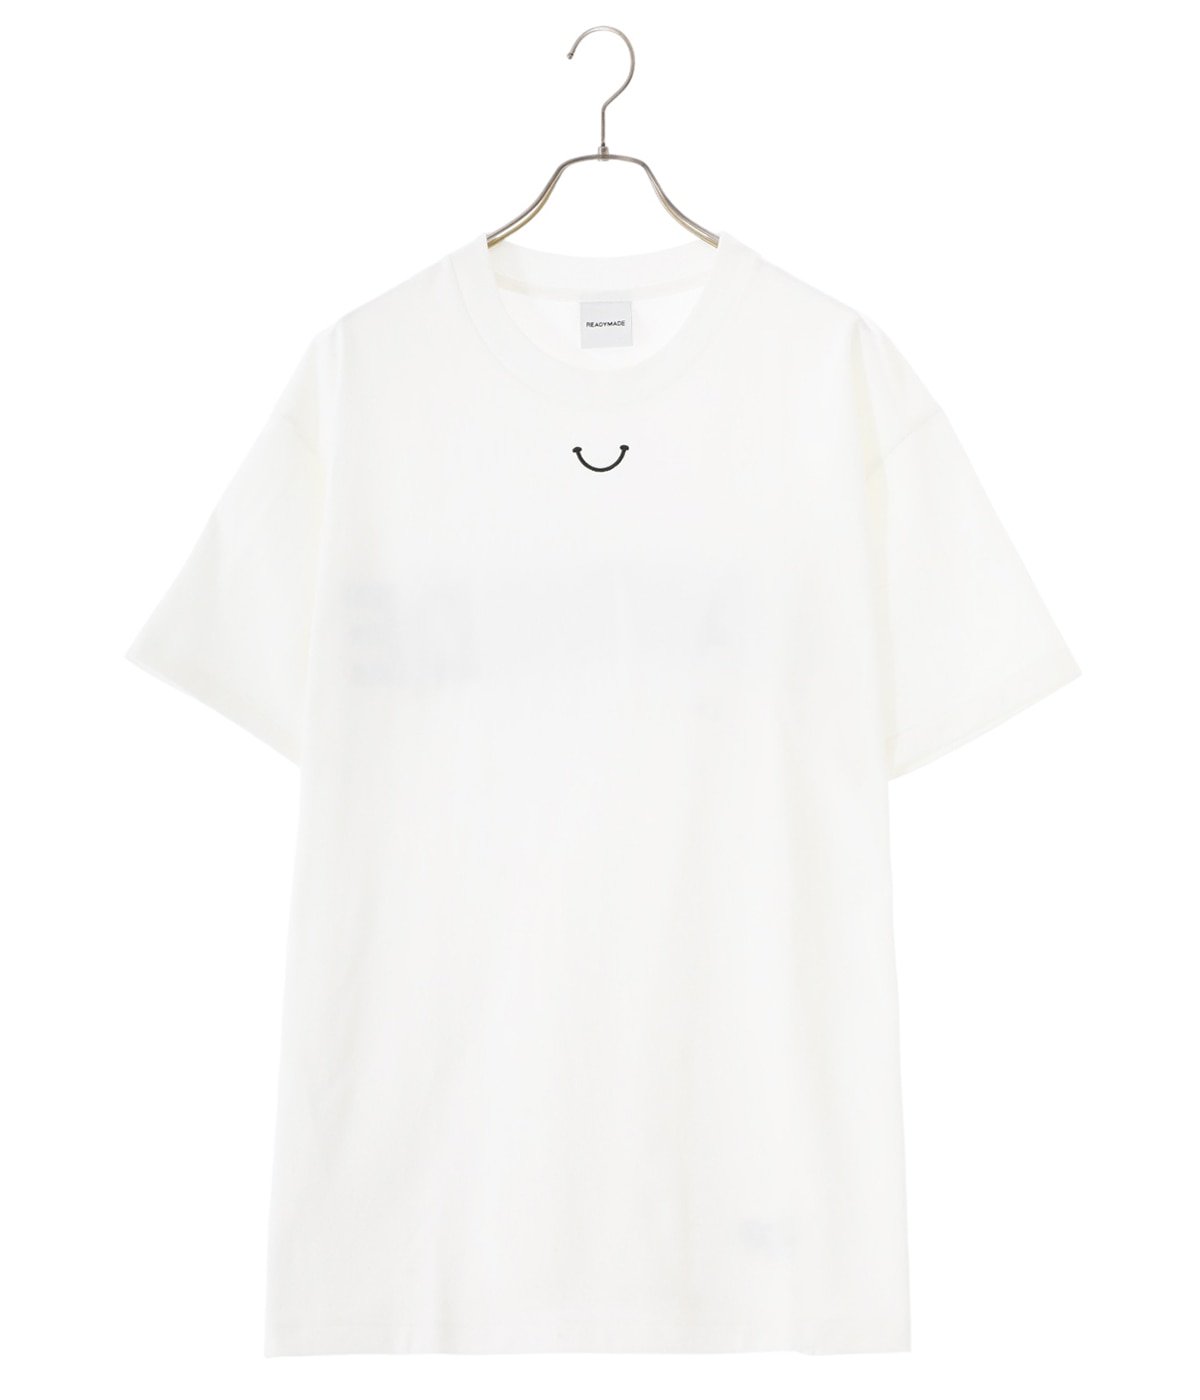 SS T-SHIRT SMILE | READYMADE(レディメイド) / トップス カットソー ...